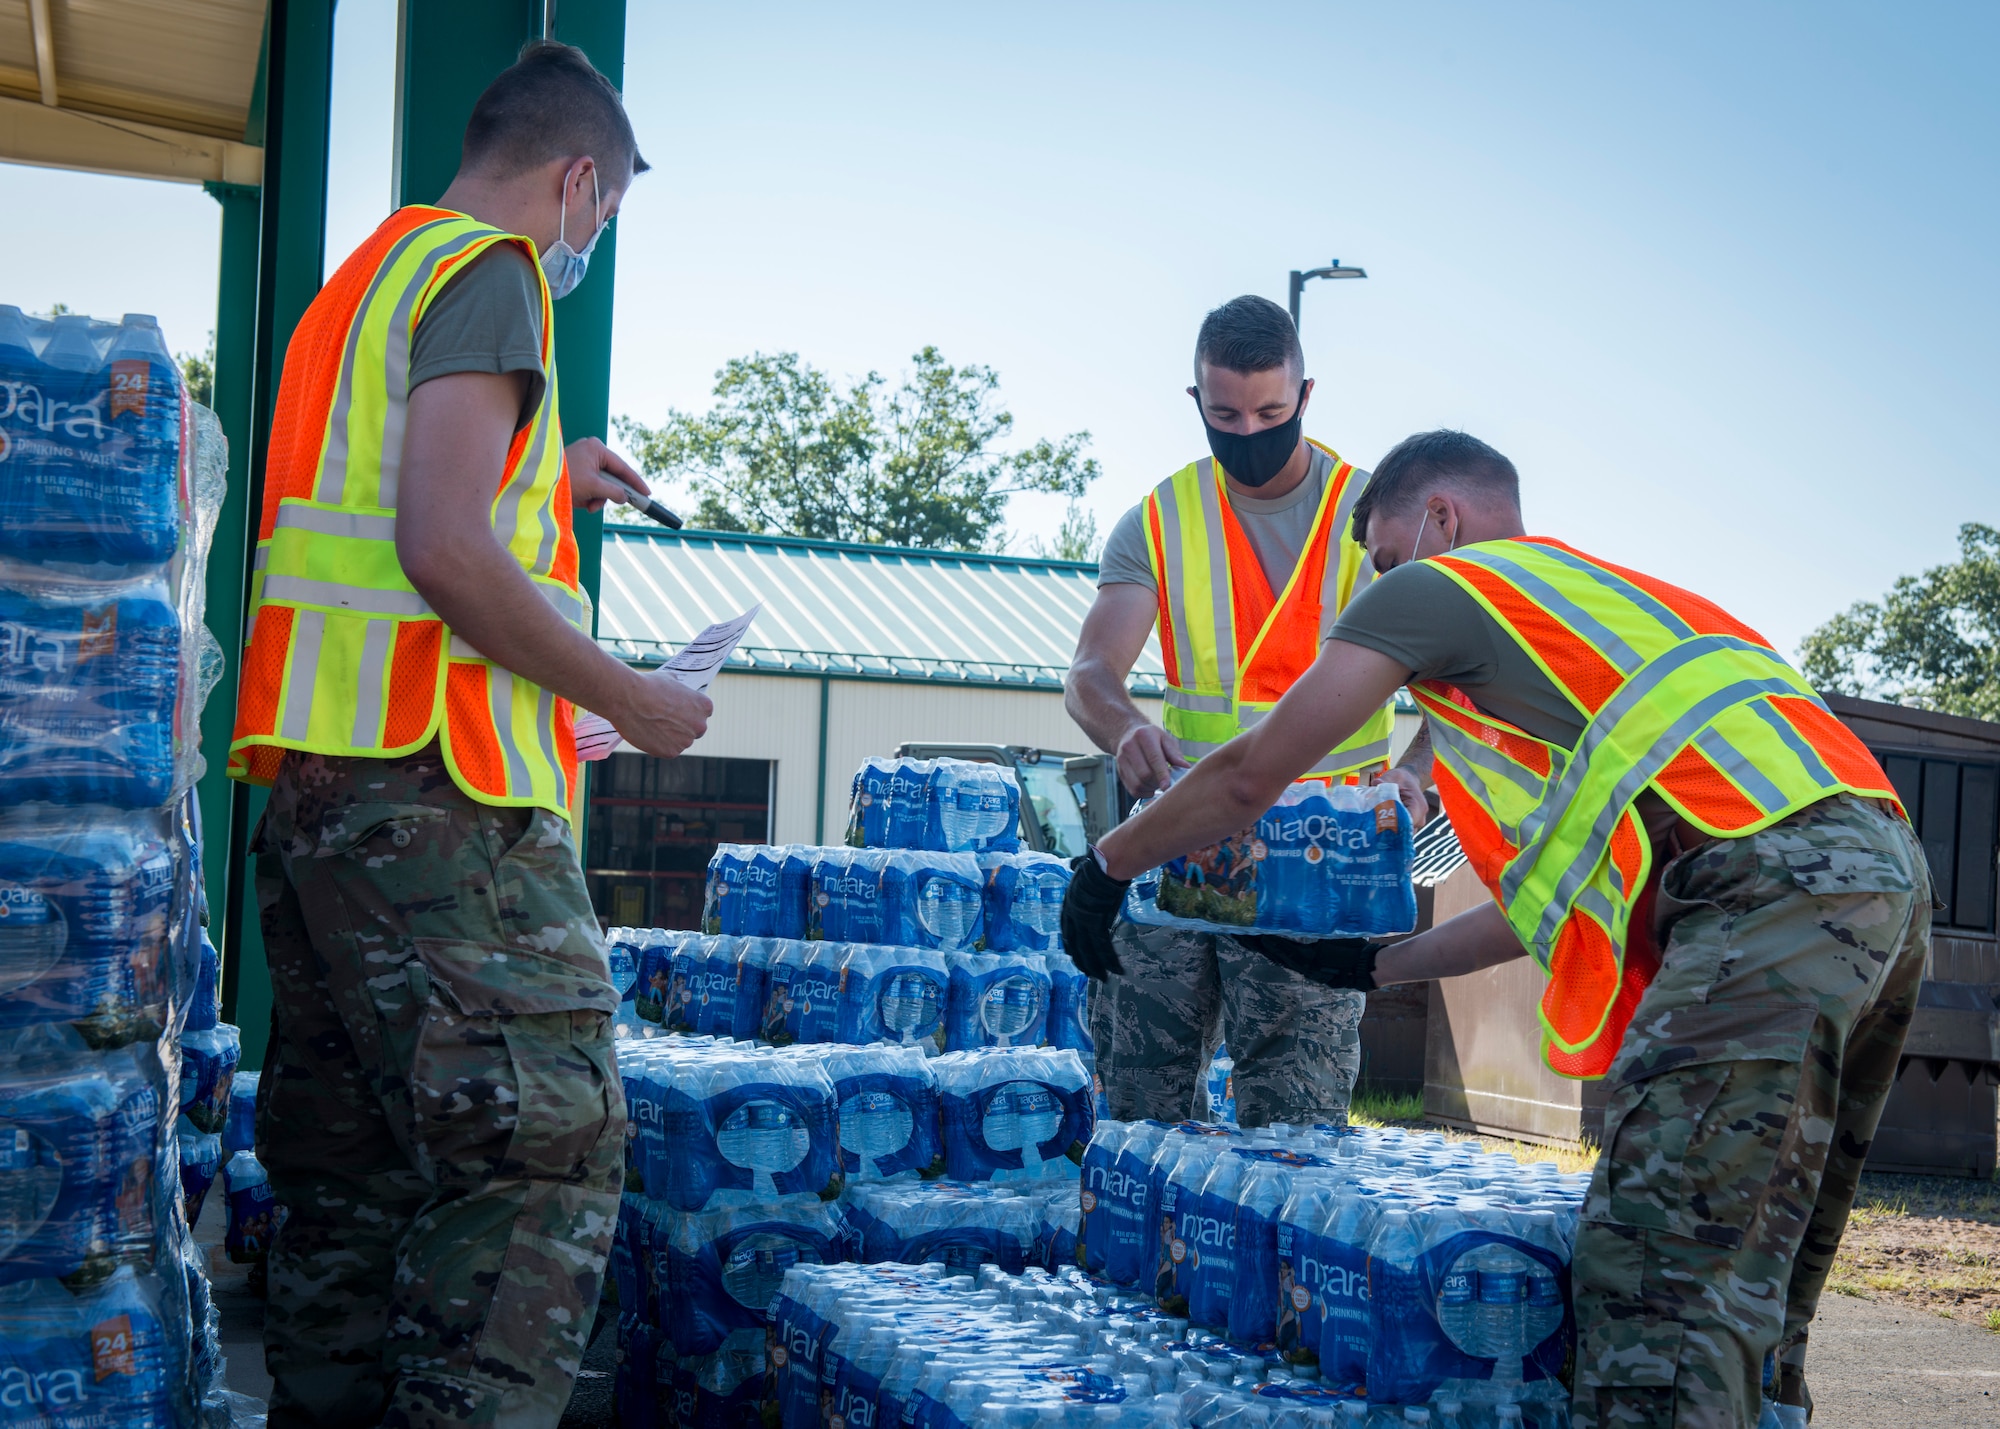 Airmen from the 103rd Airlift Wing palletize cases of water for delivery at Camp Hartell in Windsor Locks, Connecticut, Aug. 8, 2020. Soldiers and Airmen from the Connecticut National Guard delivered 21,000 cases of water from FEMA to towns throughout the state in response to Tropical Storm Isaias. (U.S. Air National Guard photo by Staff Sgt. Steven Tucker)